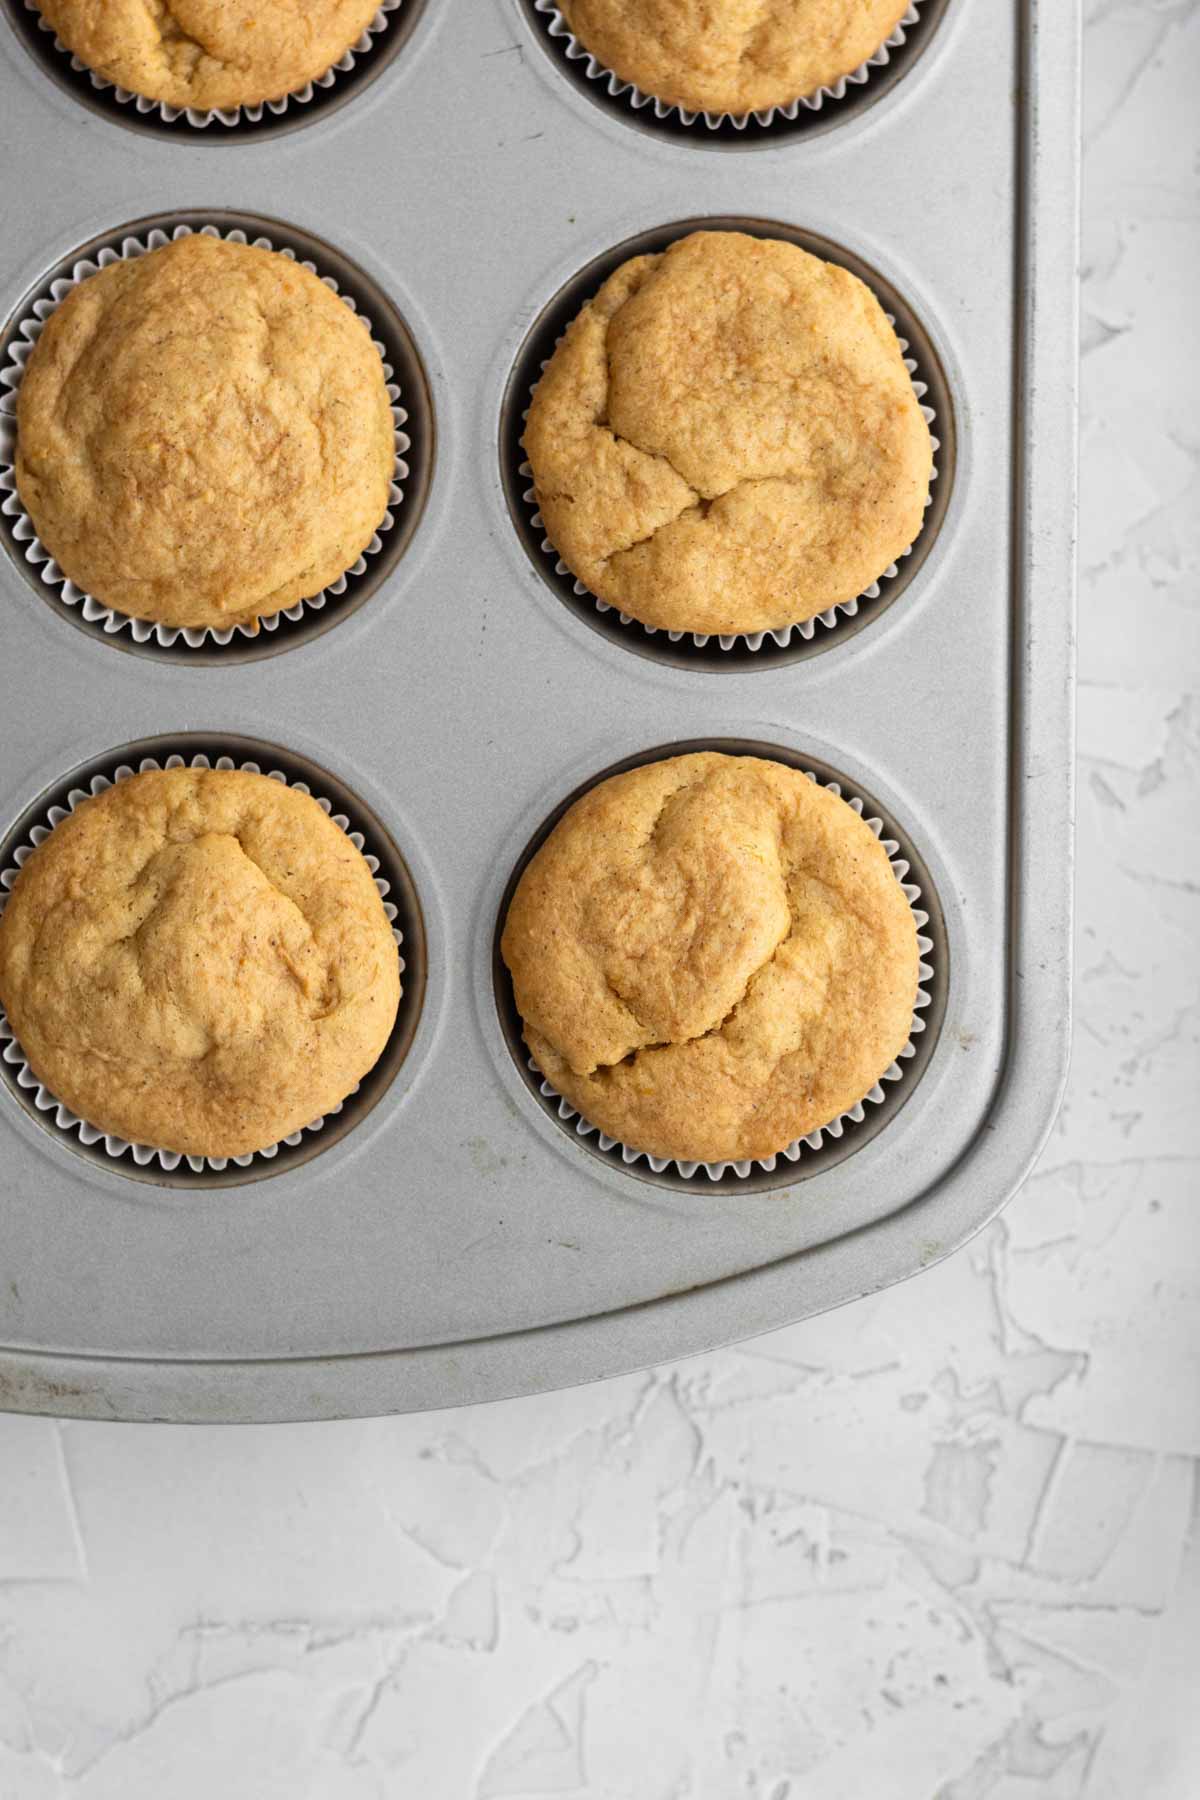 Perfect baked cupcakes fresh from the oven.